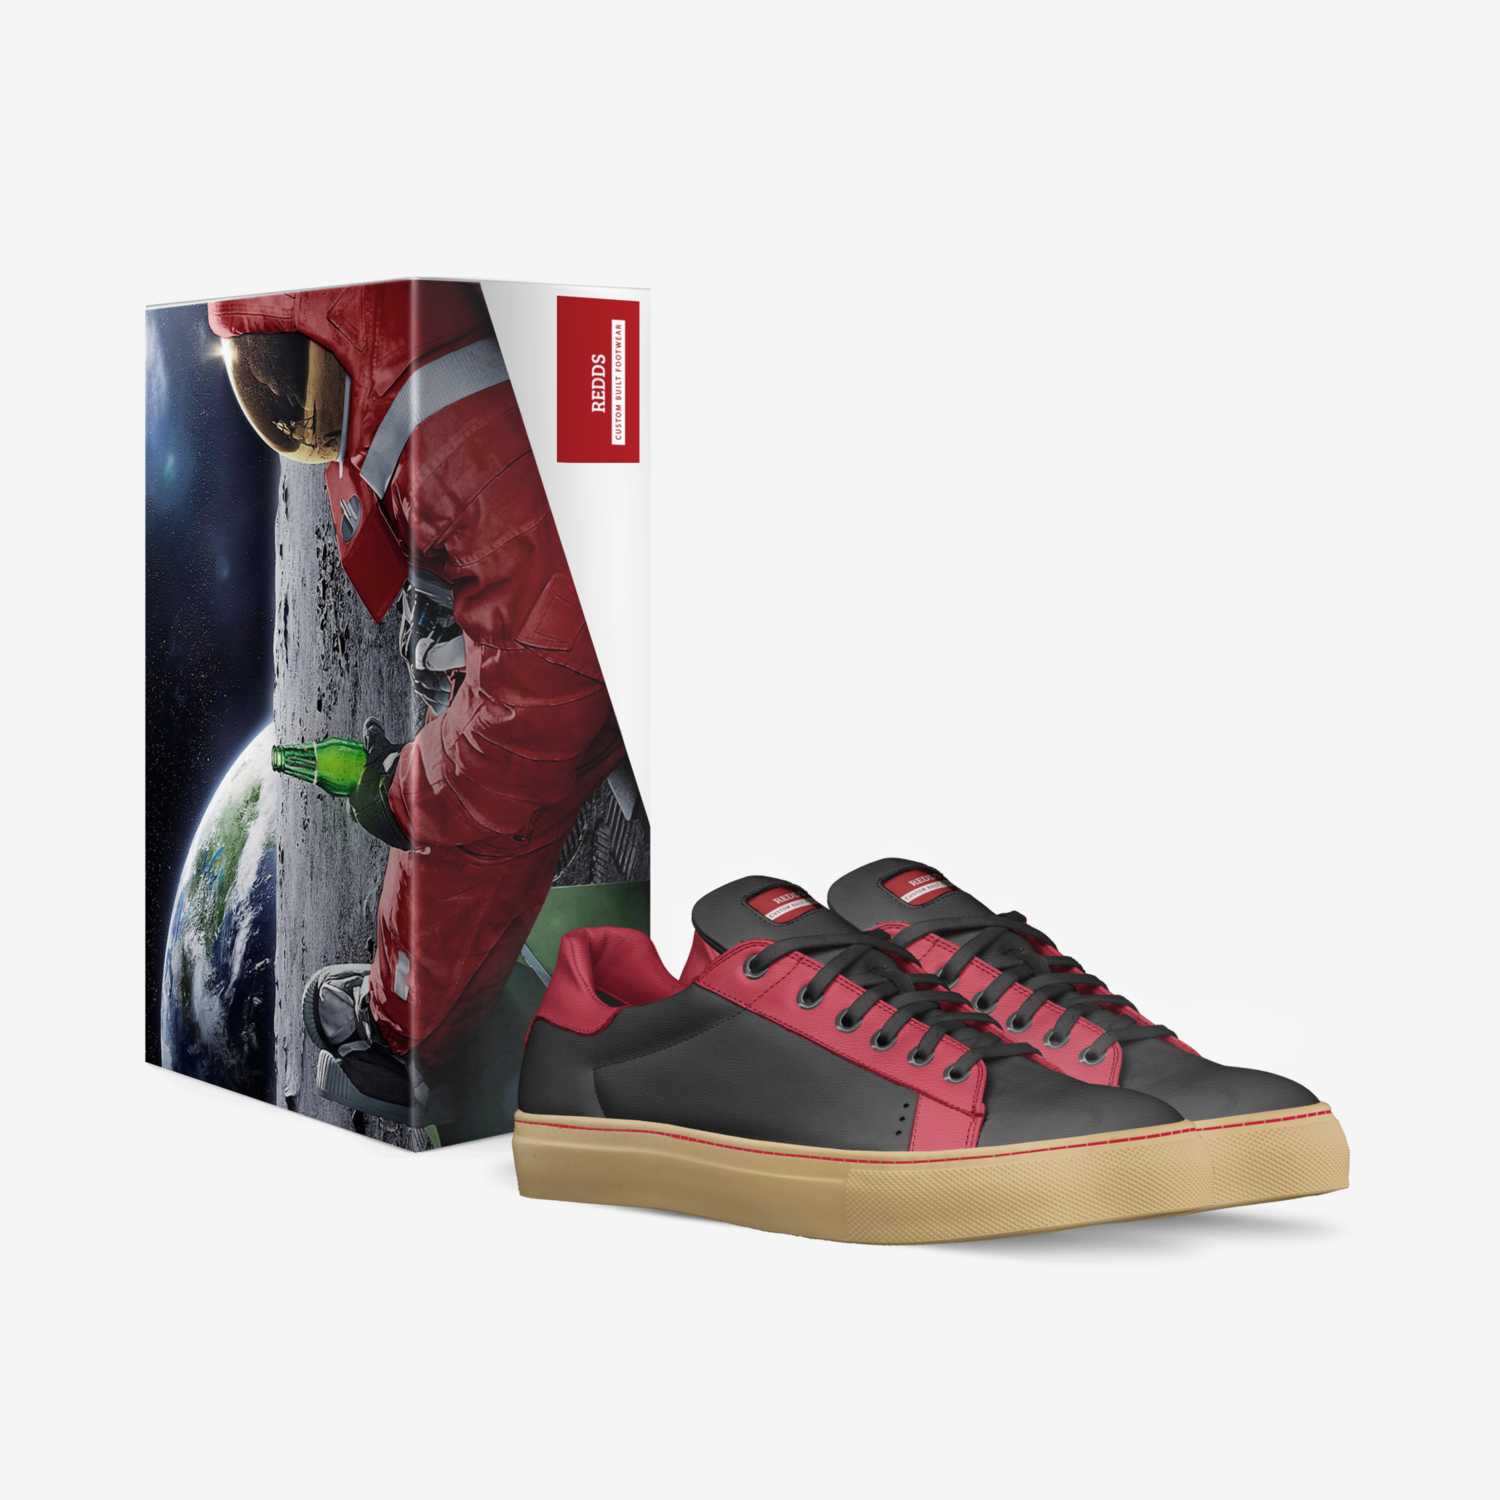 REDDS FLAVA custom made in Italy shoes by Lyrell Barfield | Box view